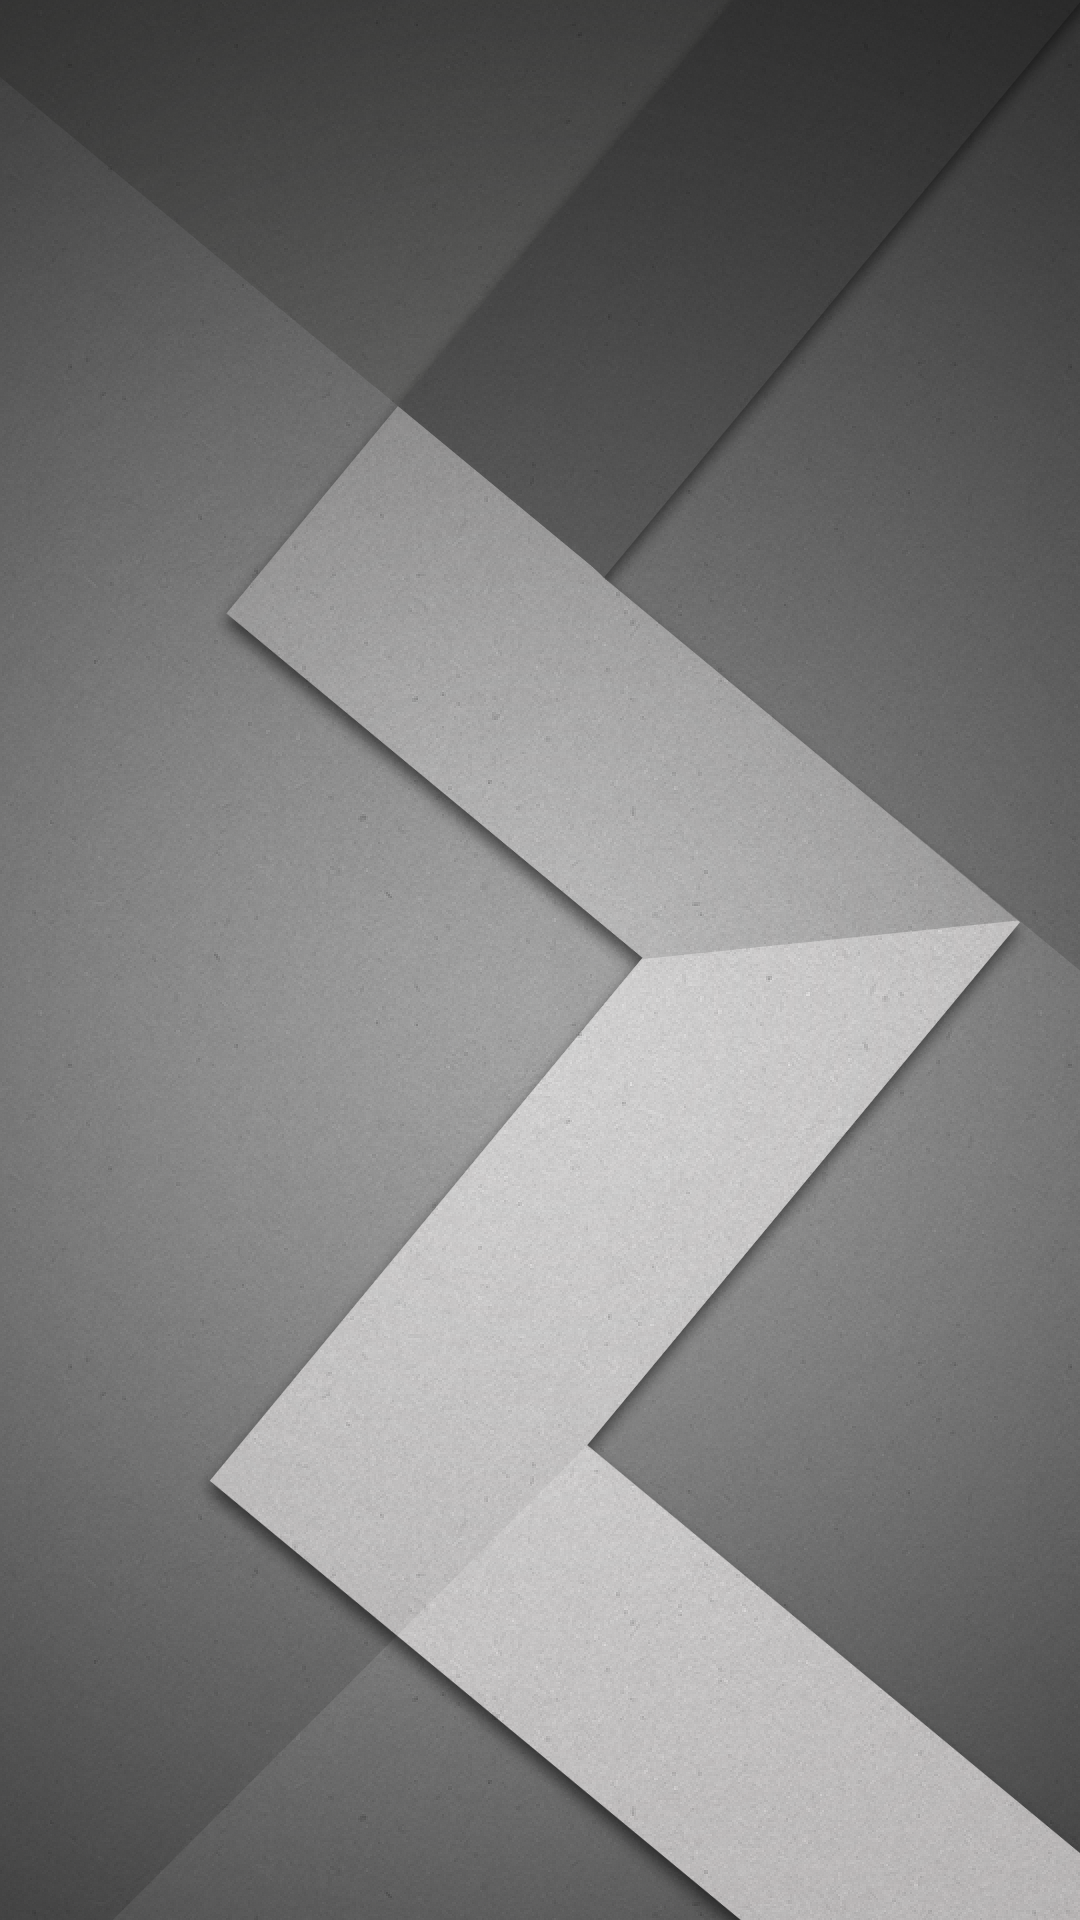 android marshmallow wallpaper 1080p,line,material property,font,architecture,triangle